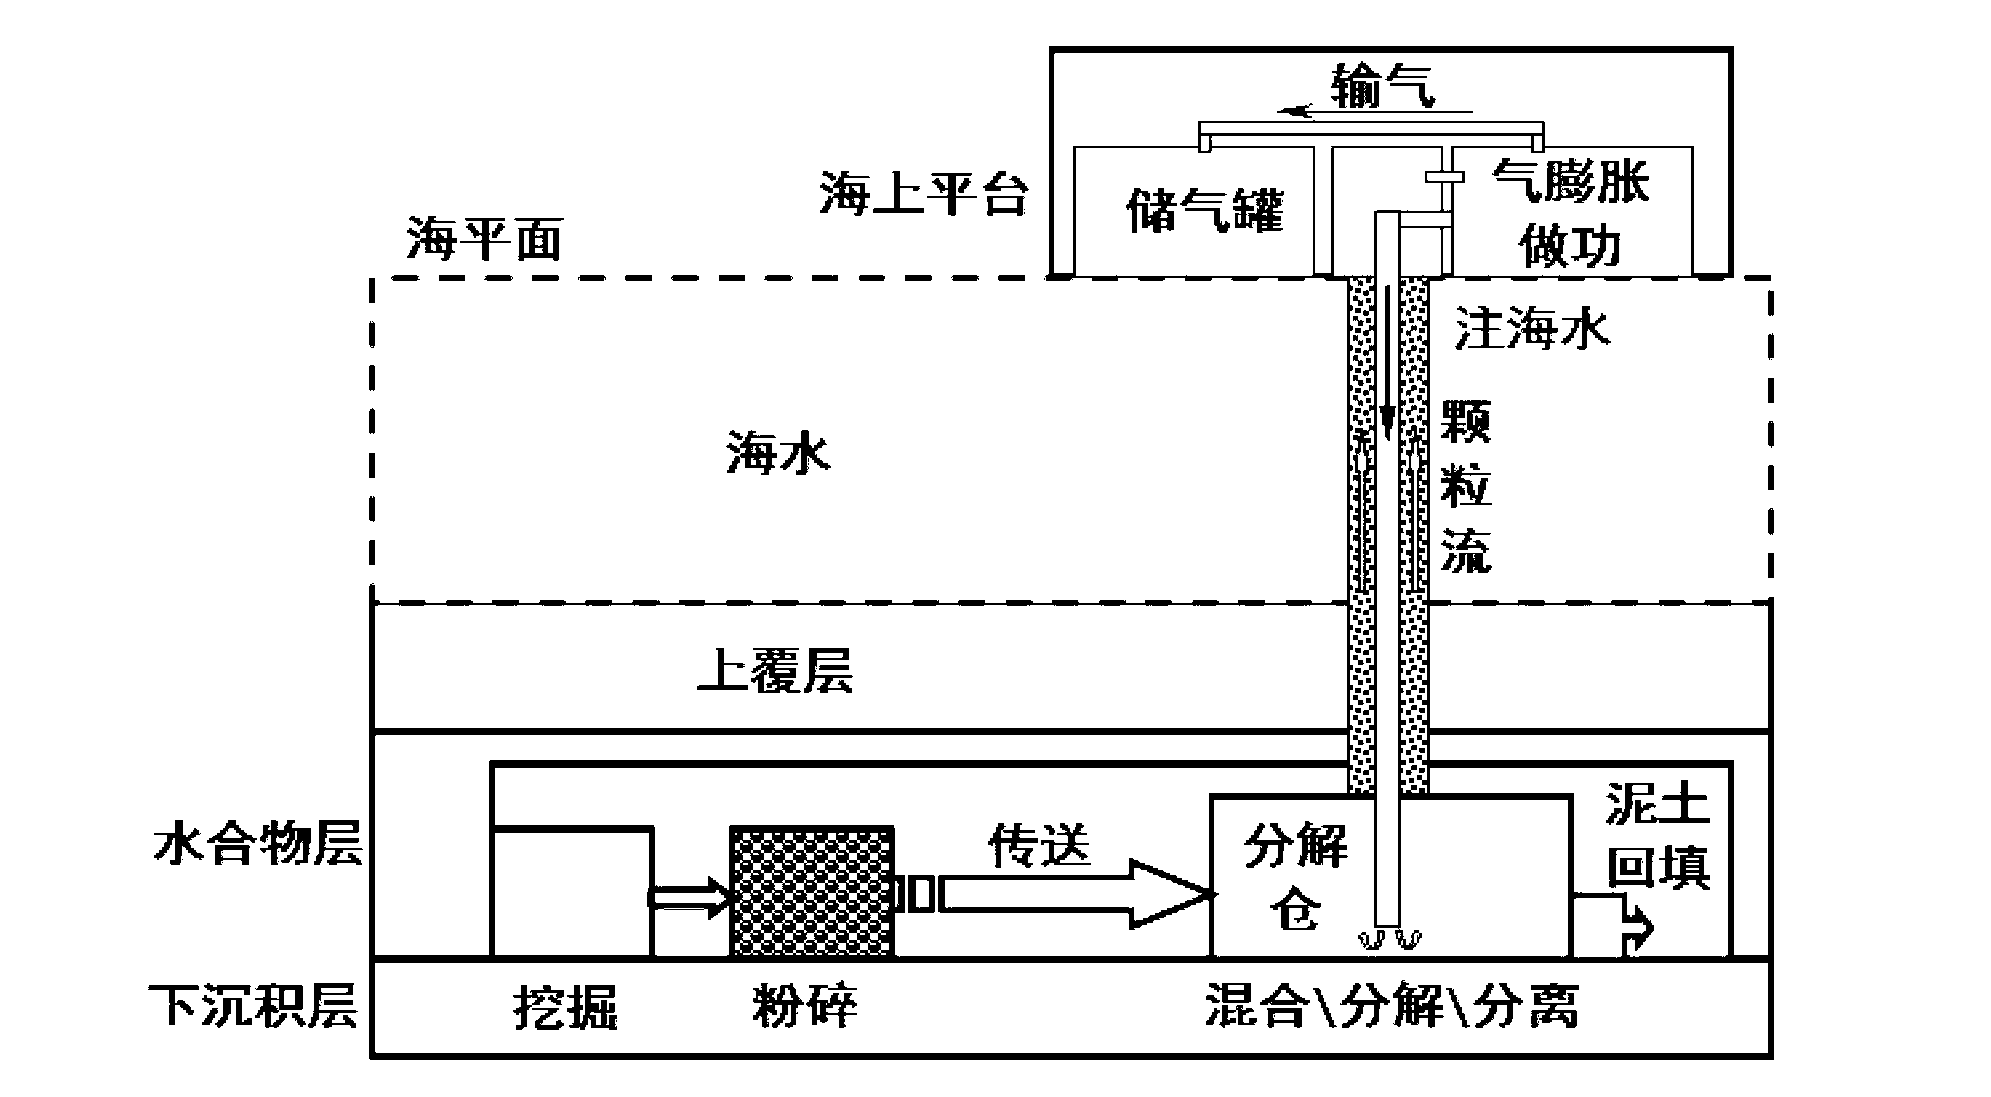 Mechanical-thermal hydrate exploiting method